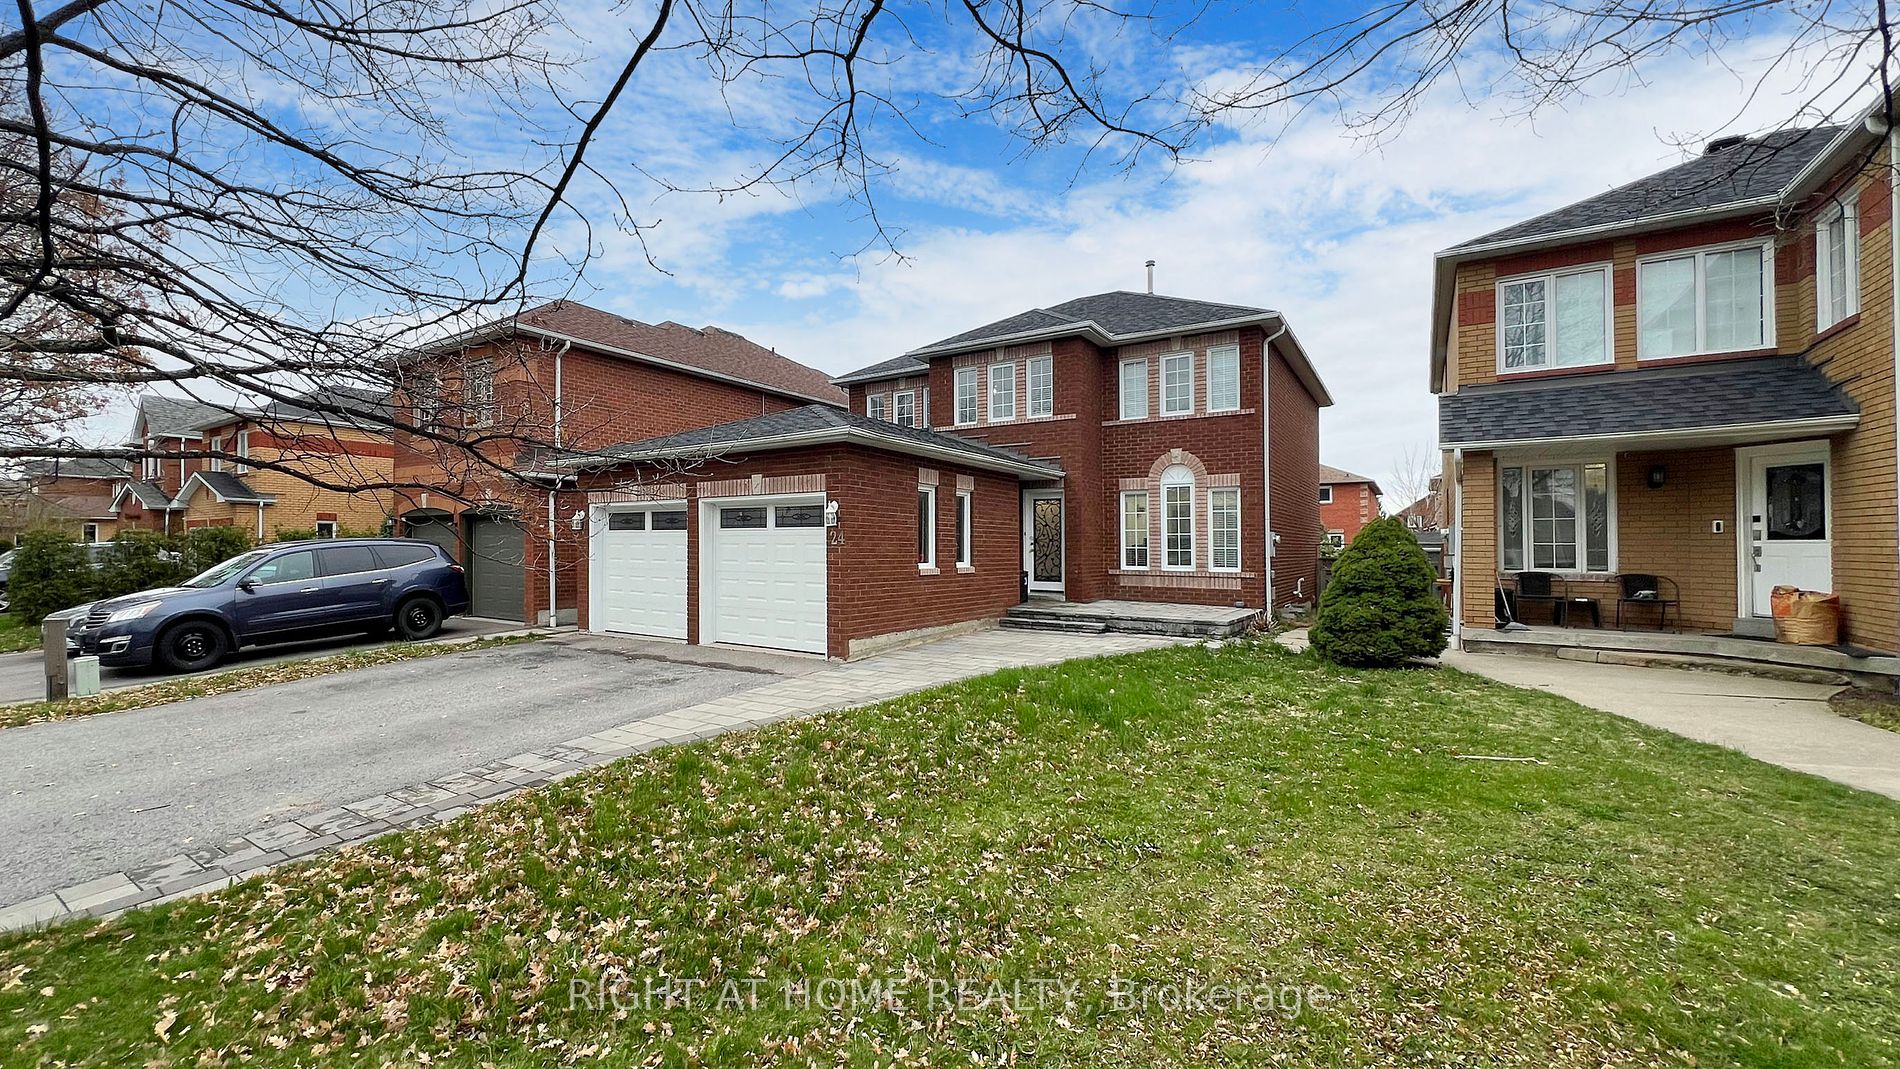 Detached house for sale at 24 Holmes Cres Ajax Ontario